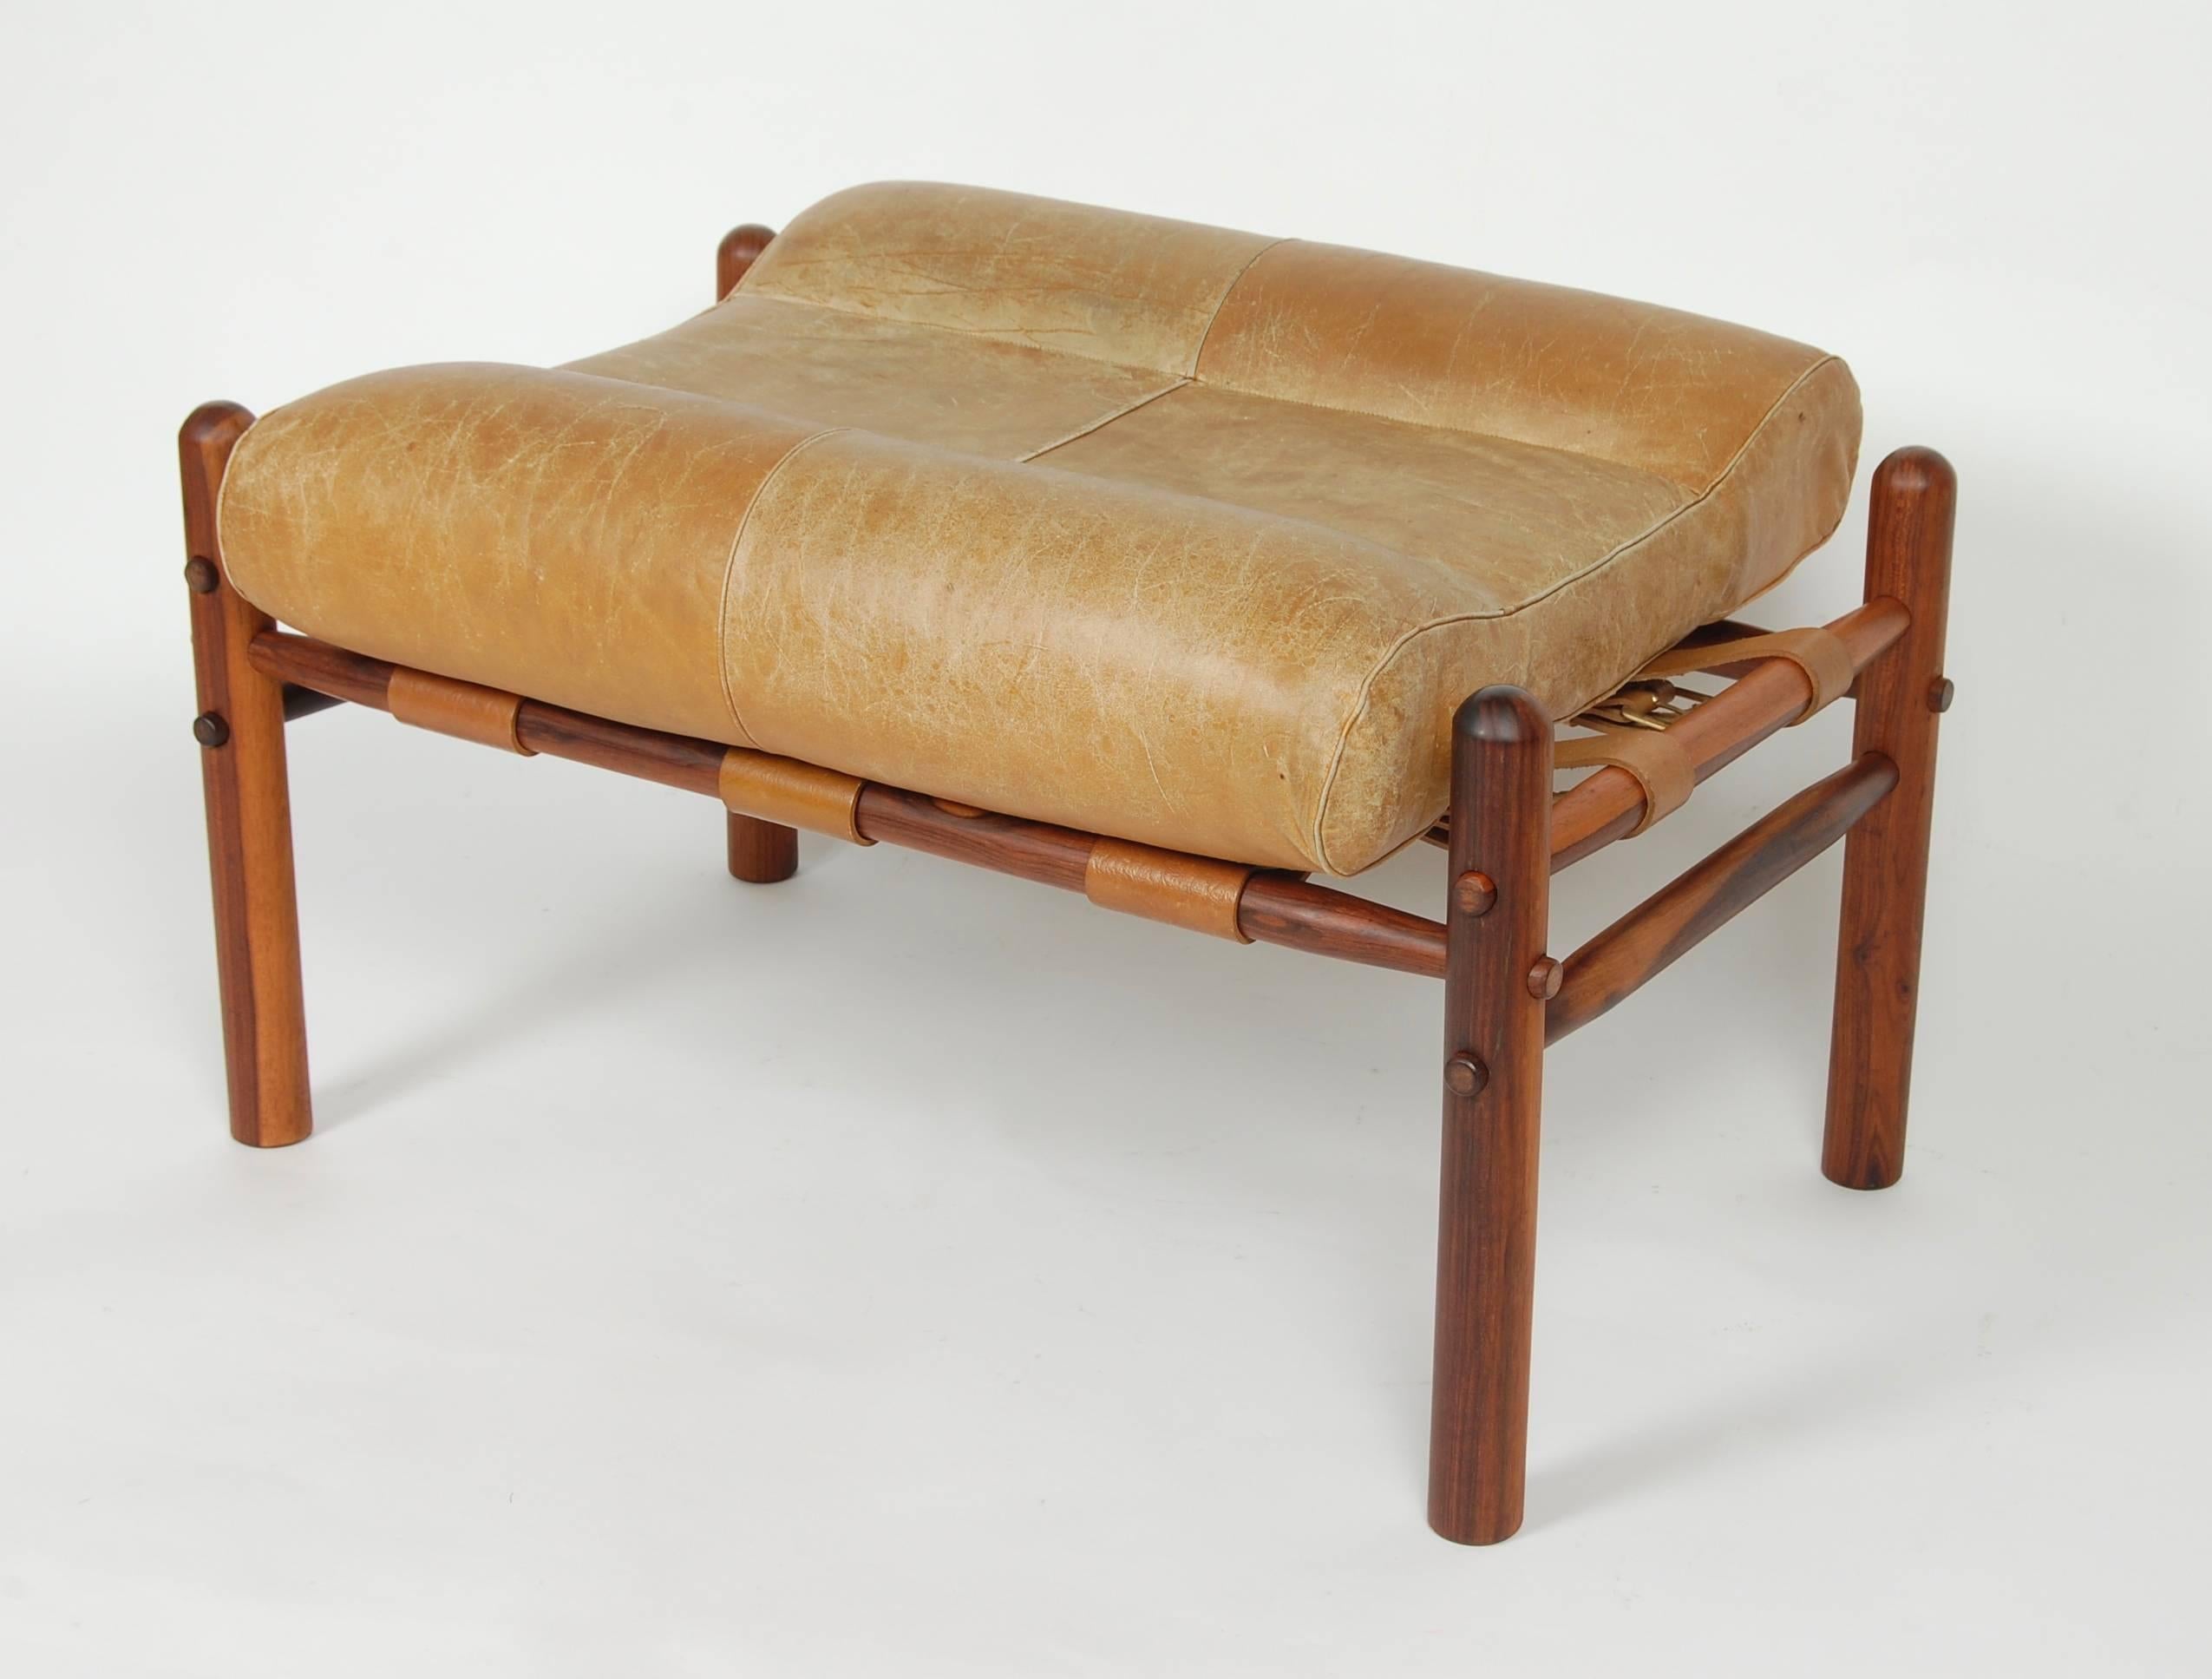 Rosewood and leather ottoman by Swedish designer Arne Norell, part of the Safari chair series he created in which the piece is designed to break down completely.